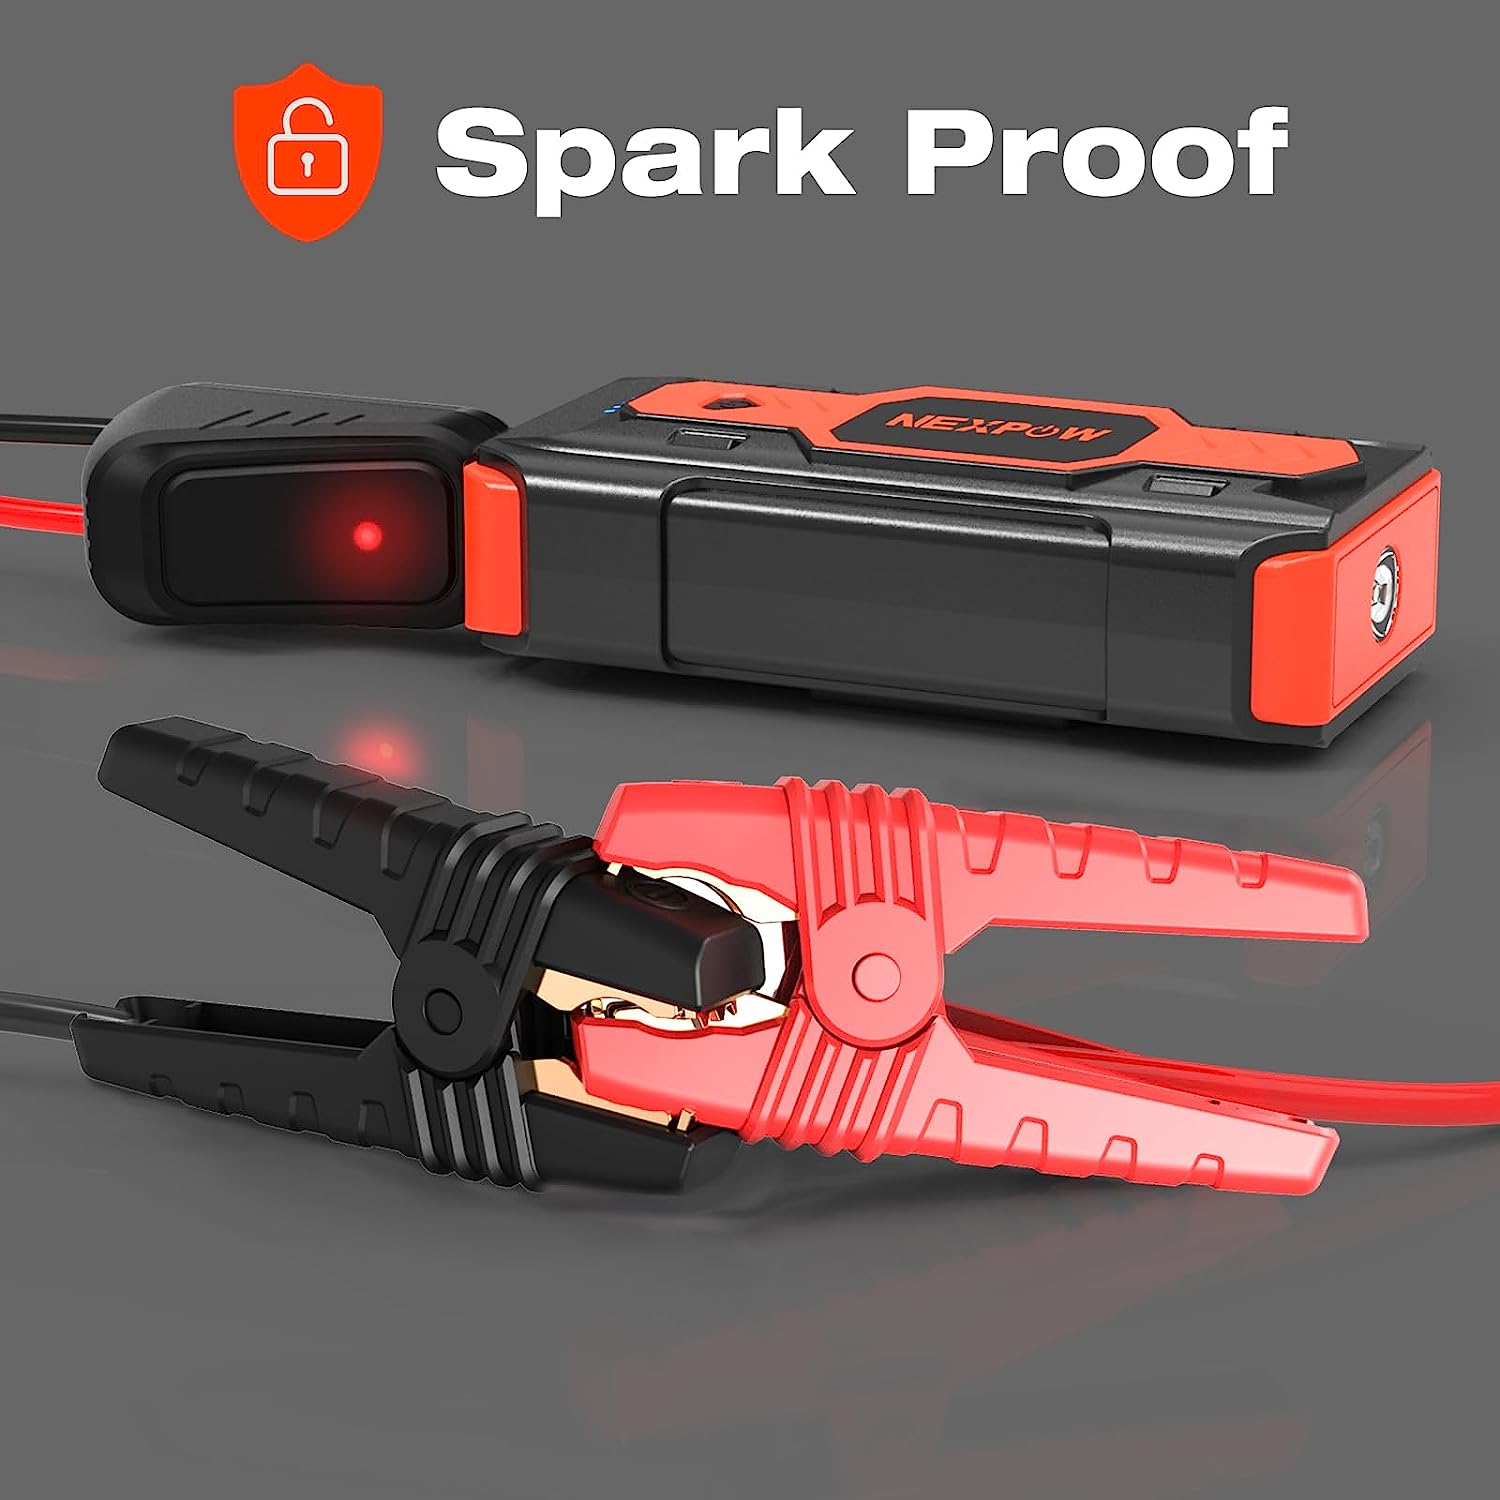 https://bigbigmart.com/wp-content/uploads/2023/06/NEXPOW-Battery-Jump-Starter-2500A-22000mAh-up-to-8.0L-Gas-8L-Diesel-Engines-12V-Car-Battery-Booster-Pack-with-USB-Quick-Charge-3.0-and-4-LED-Modes-Red-Blue-Warning3.jpg